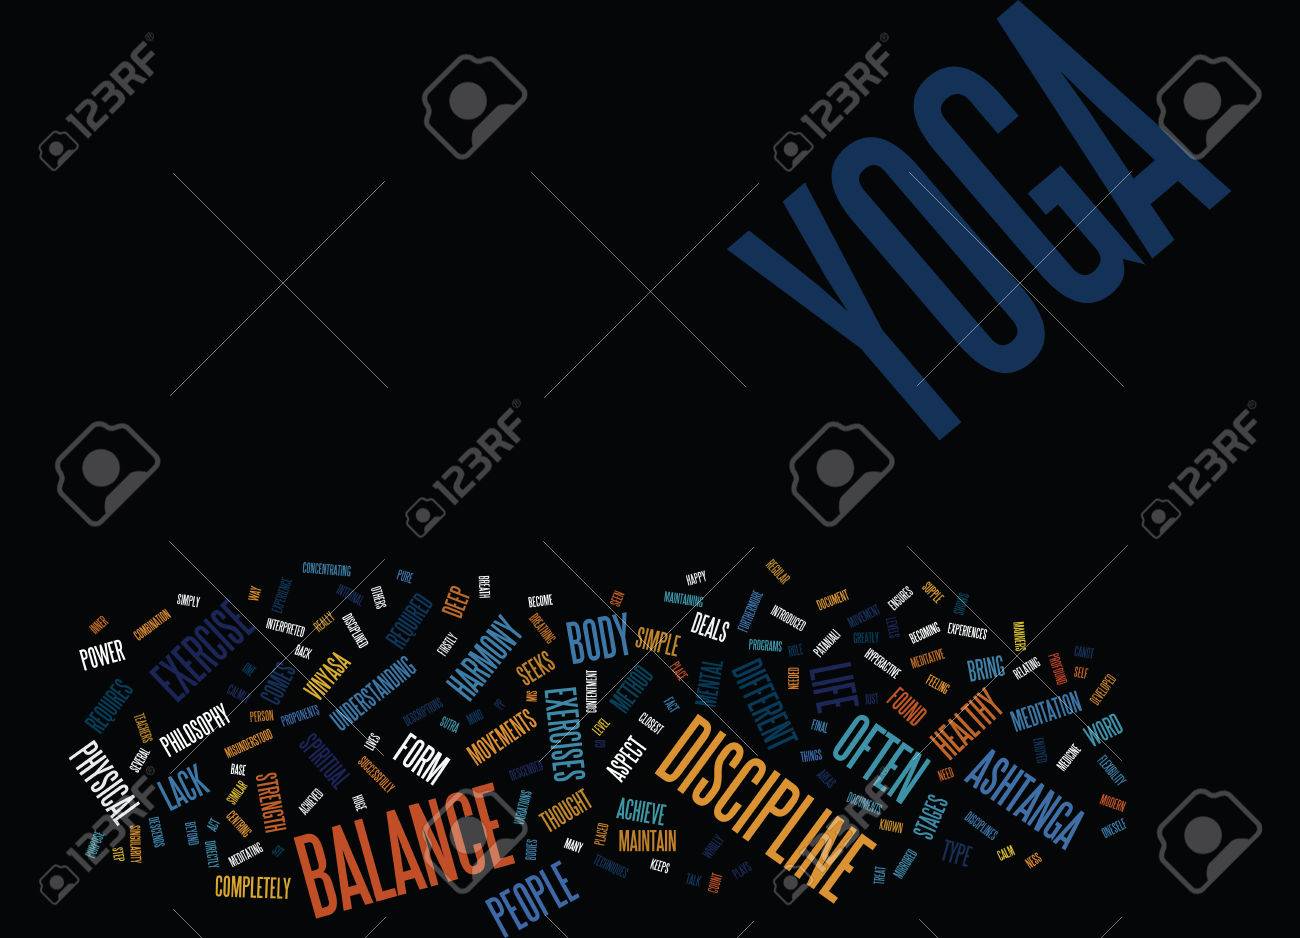 Yoga As A Life Philosophy Text Background Word Cloud Concept